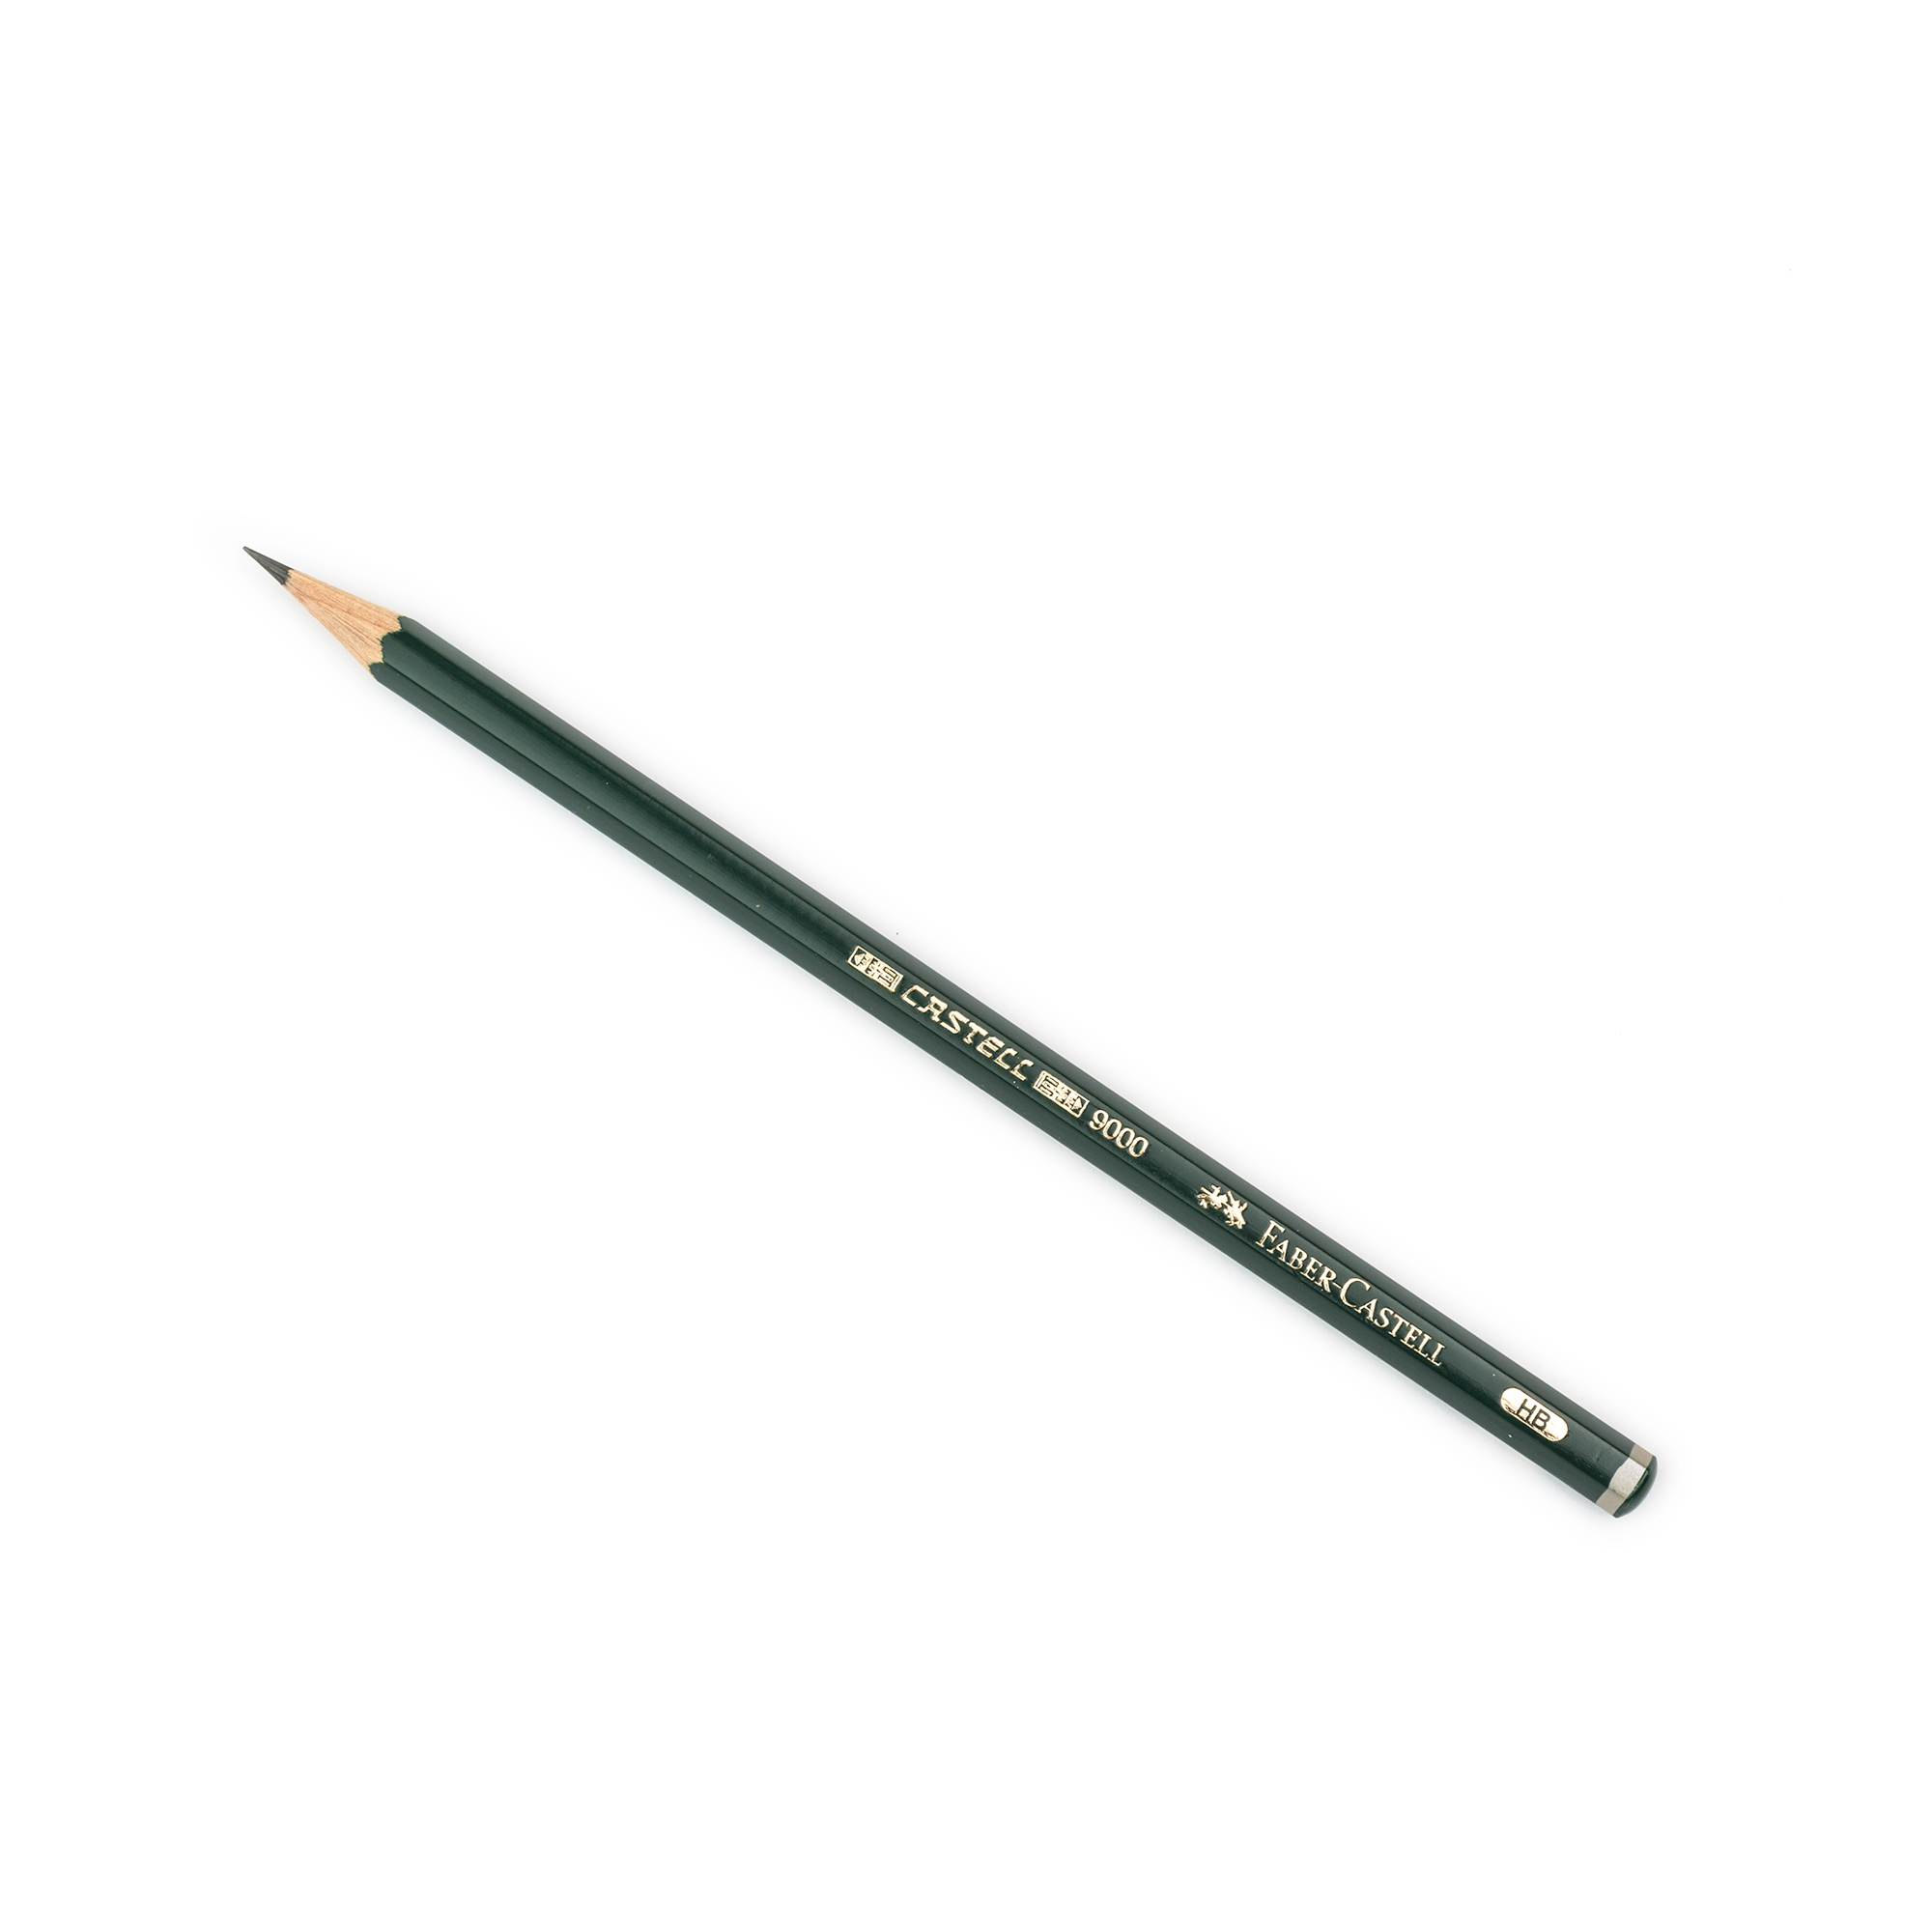 Faber-Castell Castell 9000 HB pencil – Scribe Market